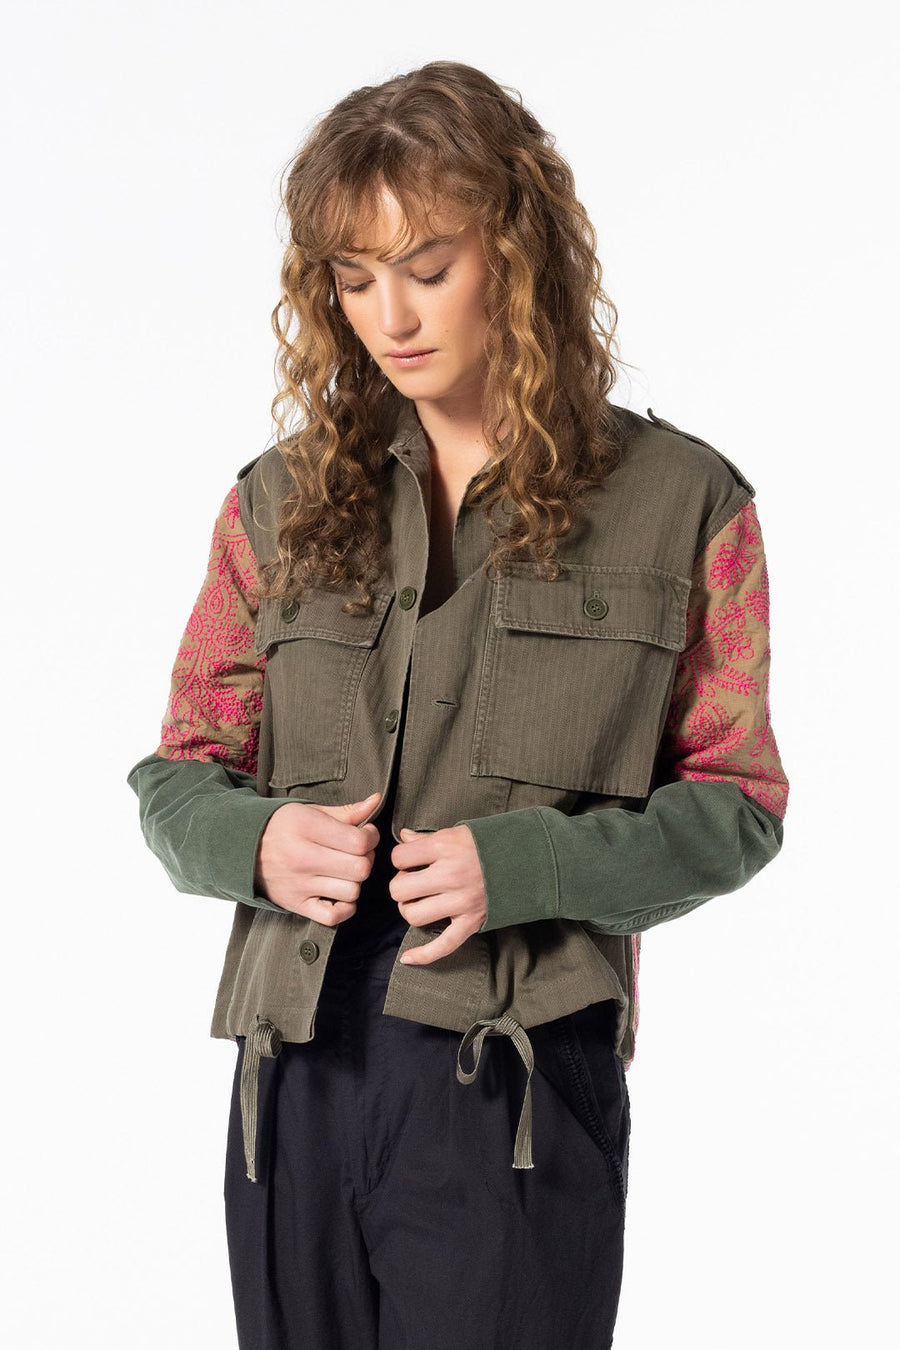 LOVE NOT WAR EMBROIDERED FLORAL JACKET, ARMY - Burning Torch Online Boutique